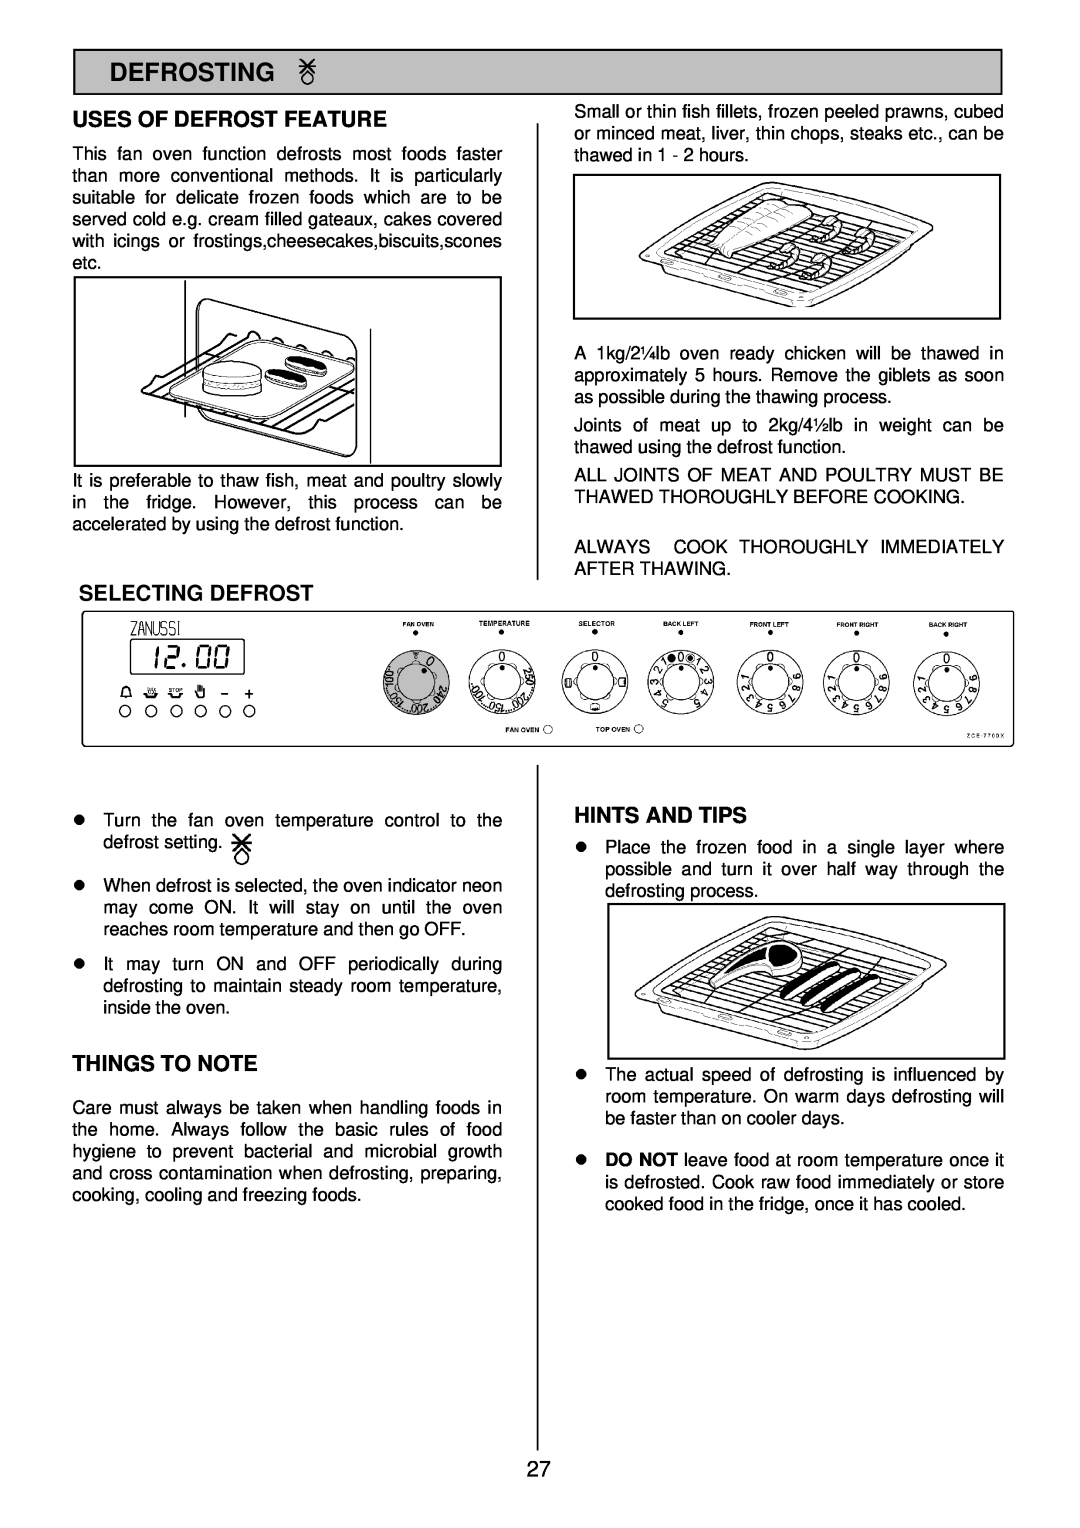 Zanussi ZCE 7700X manual Defrosting, Uses Of Defrost Feature, Selecting Defrost, Things To Note, lHINTS AND TIPS 